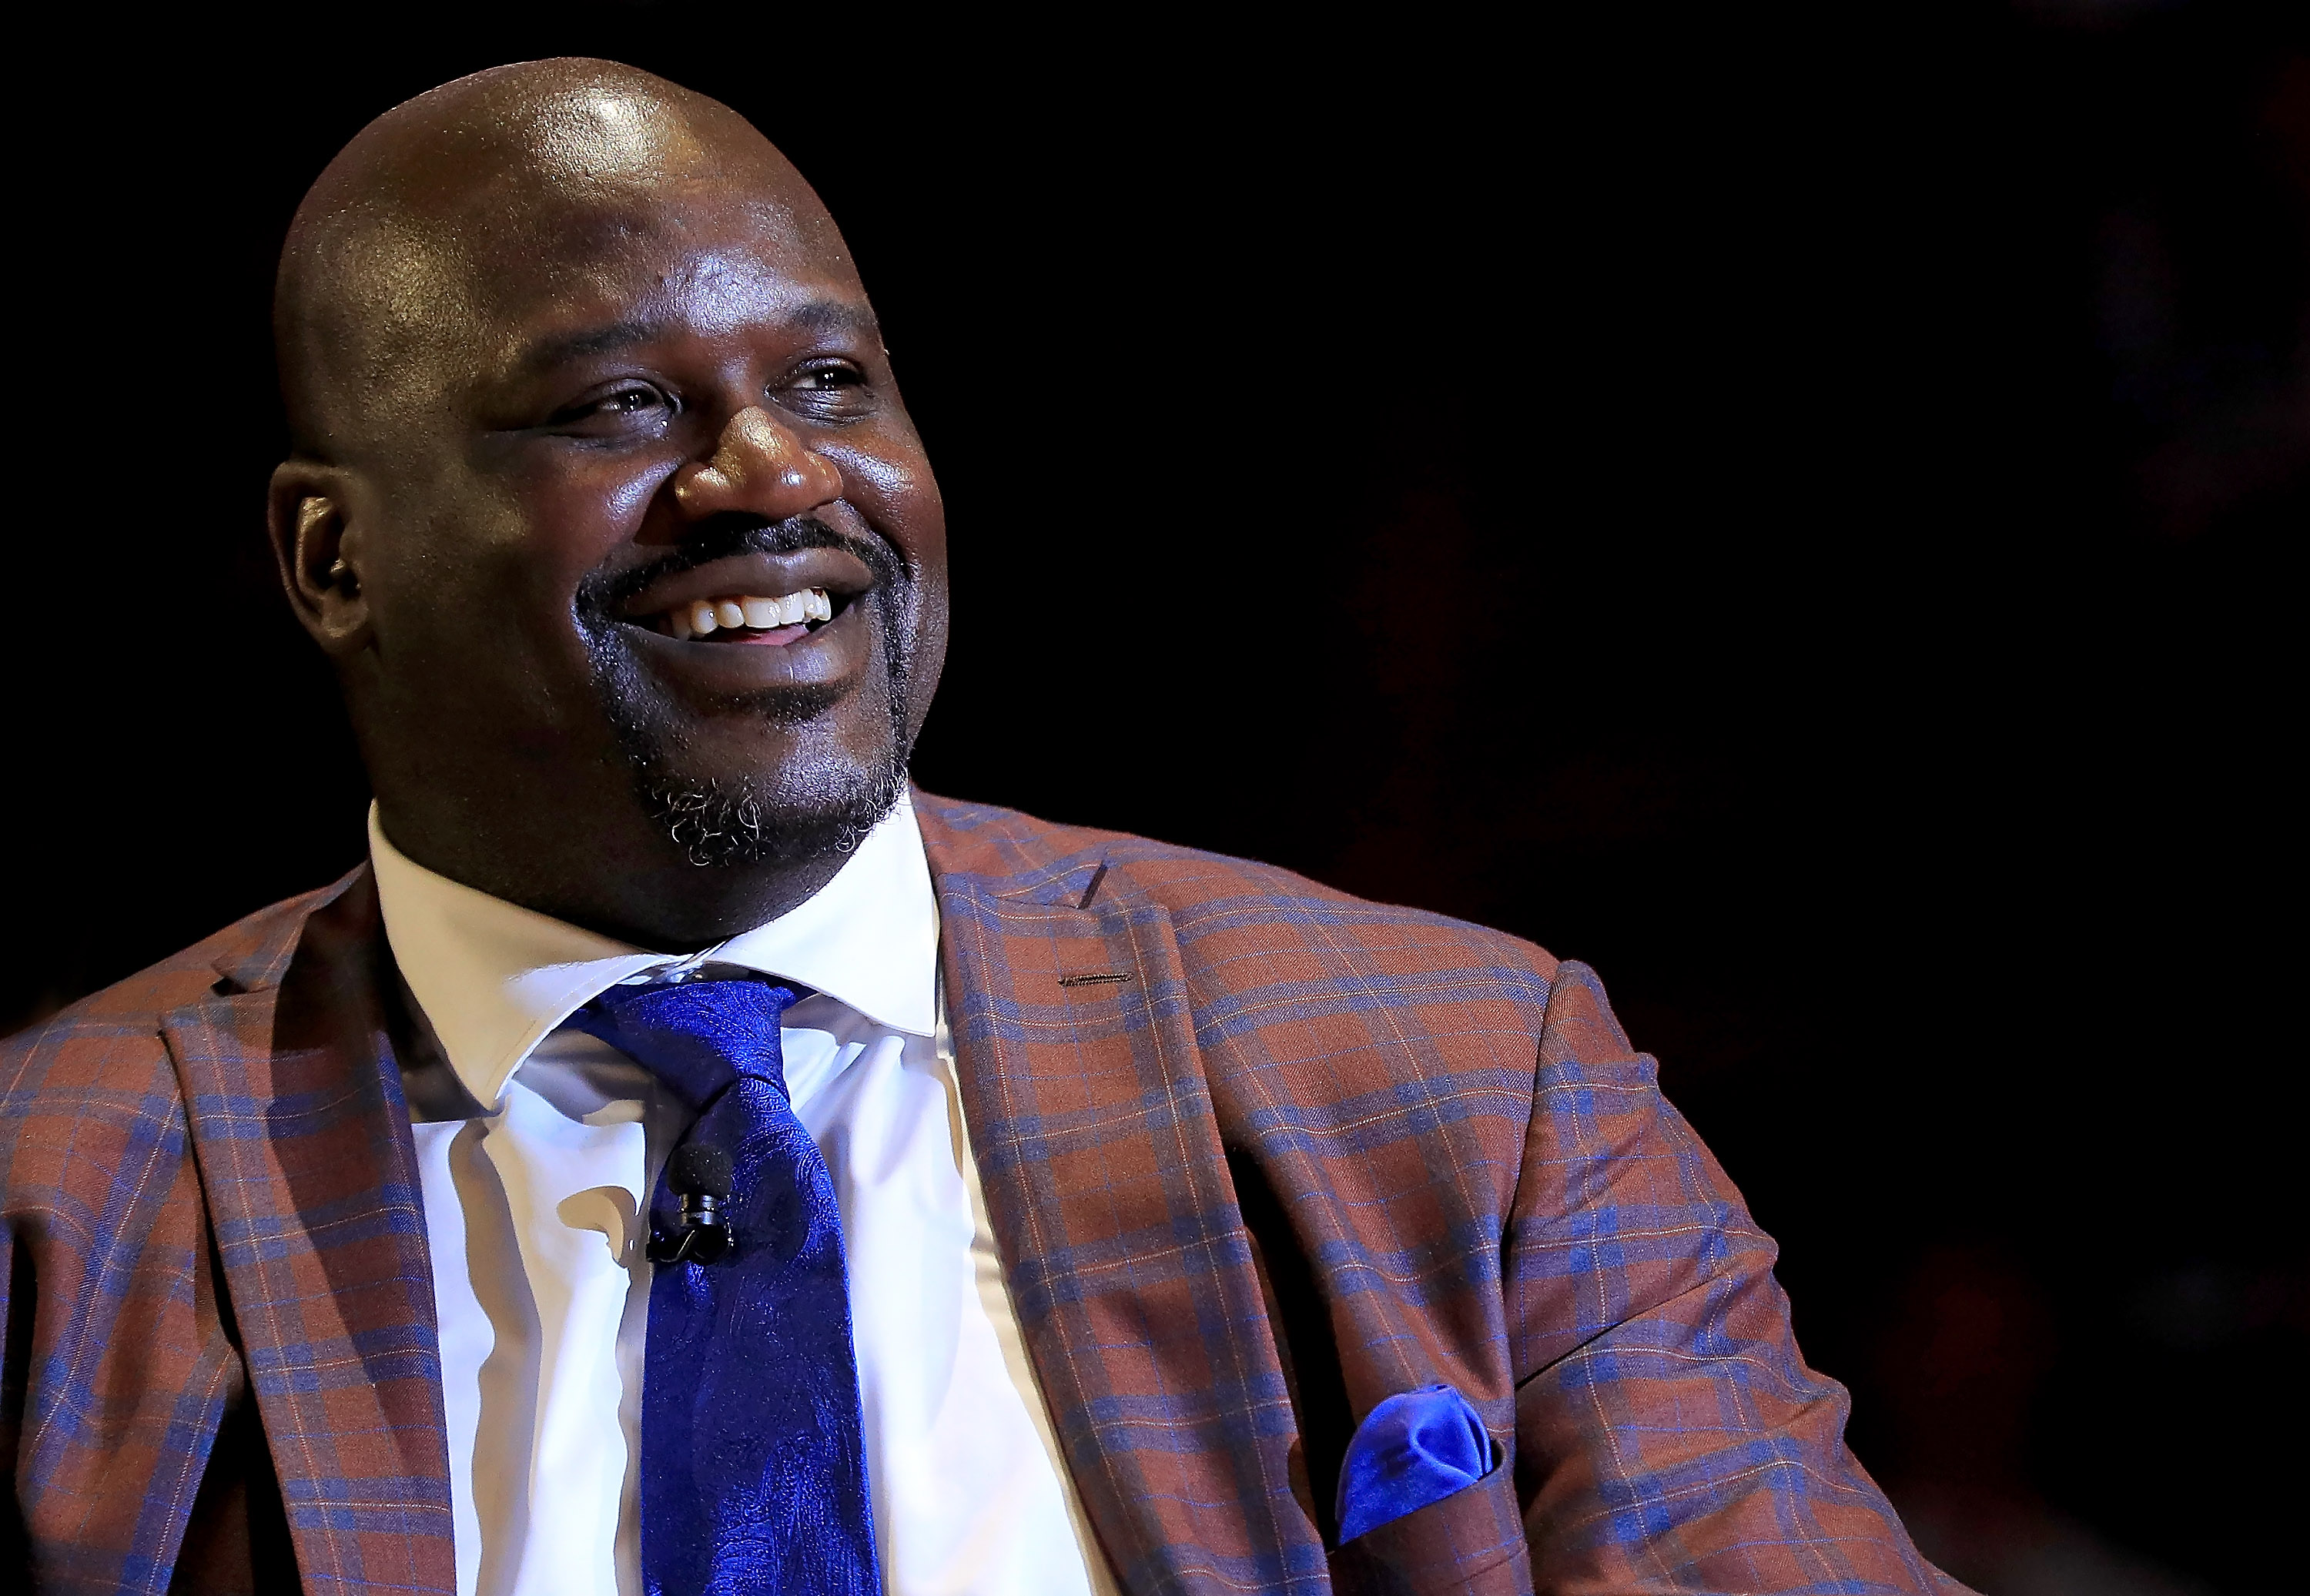 Shaq Talks Hip Hop & Says Jay Z, Notorious B.I.G. Were His Favorites To Work With